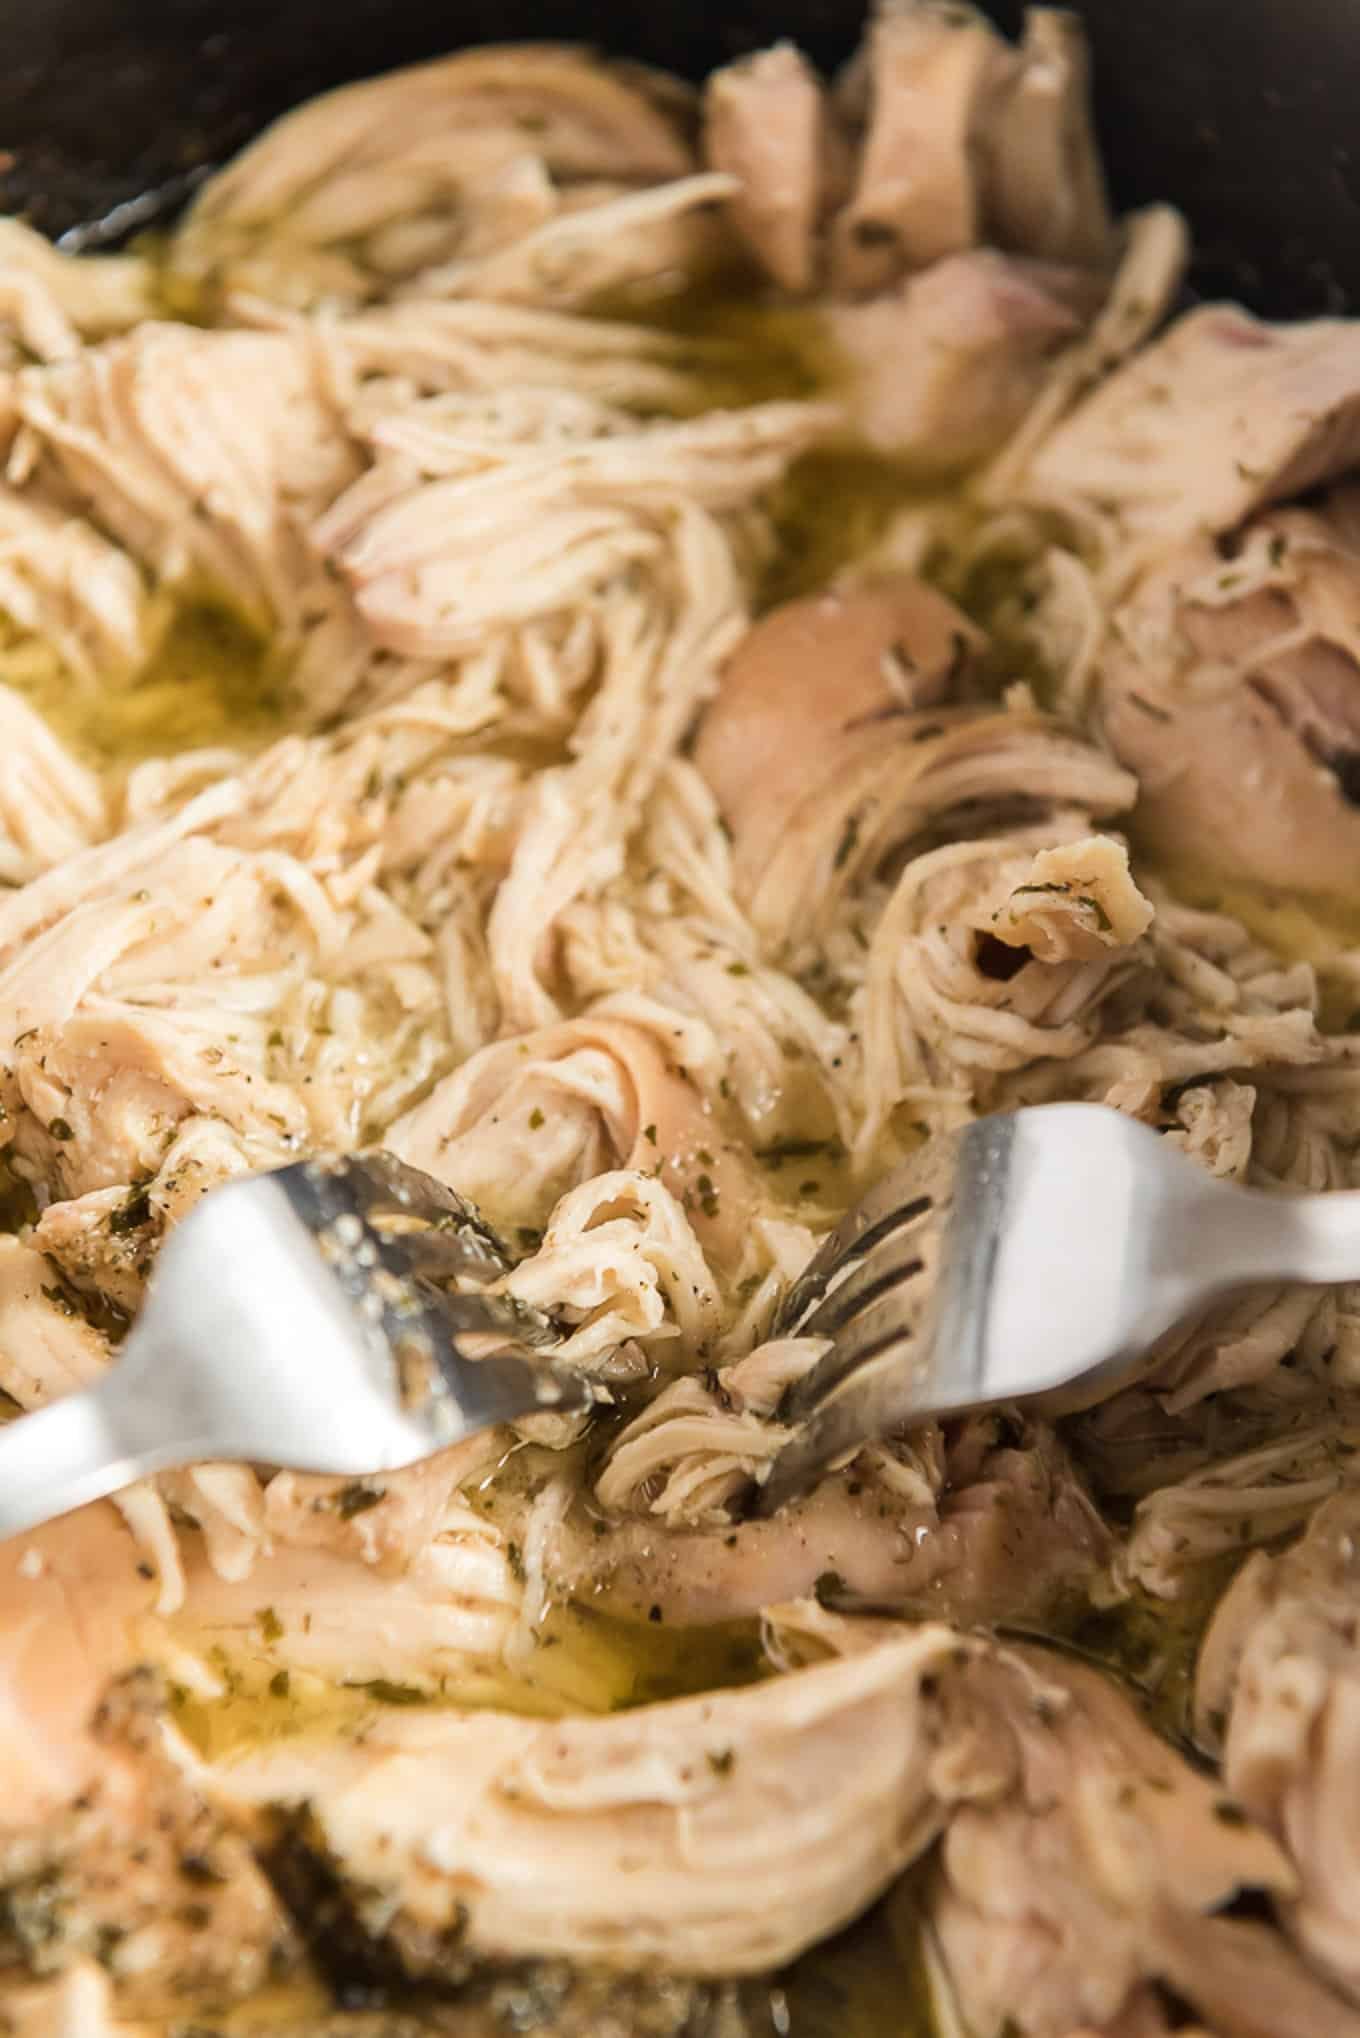 Pulling the shredded chicken apart with two forks.